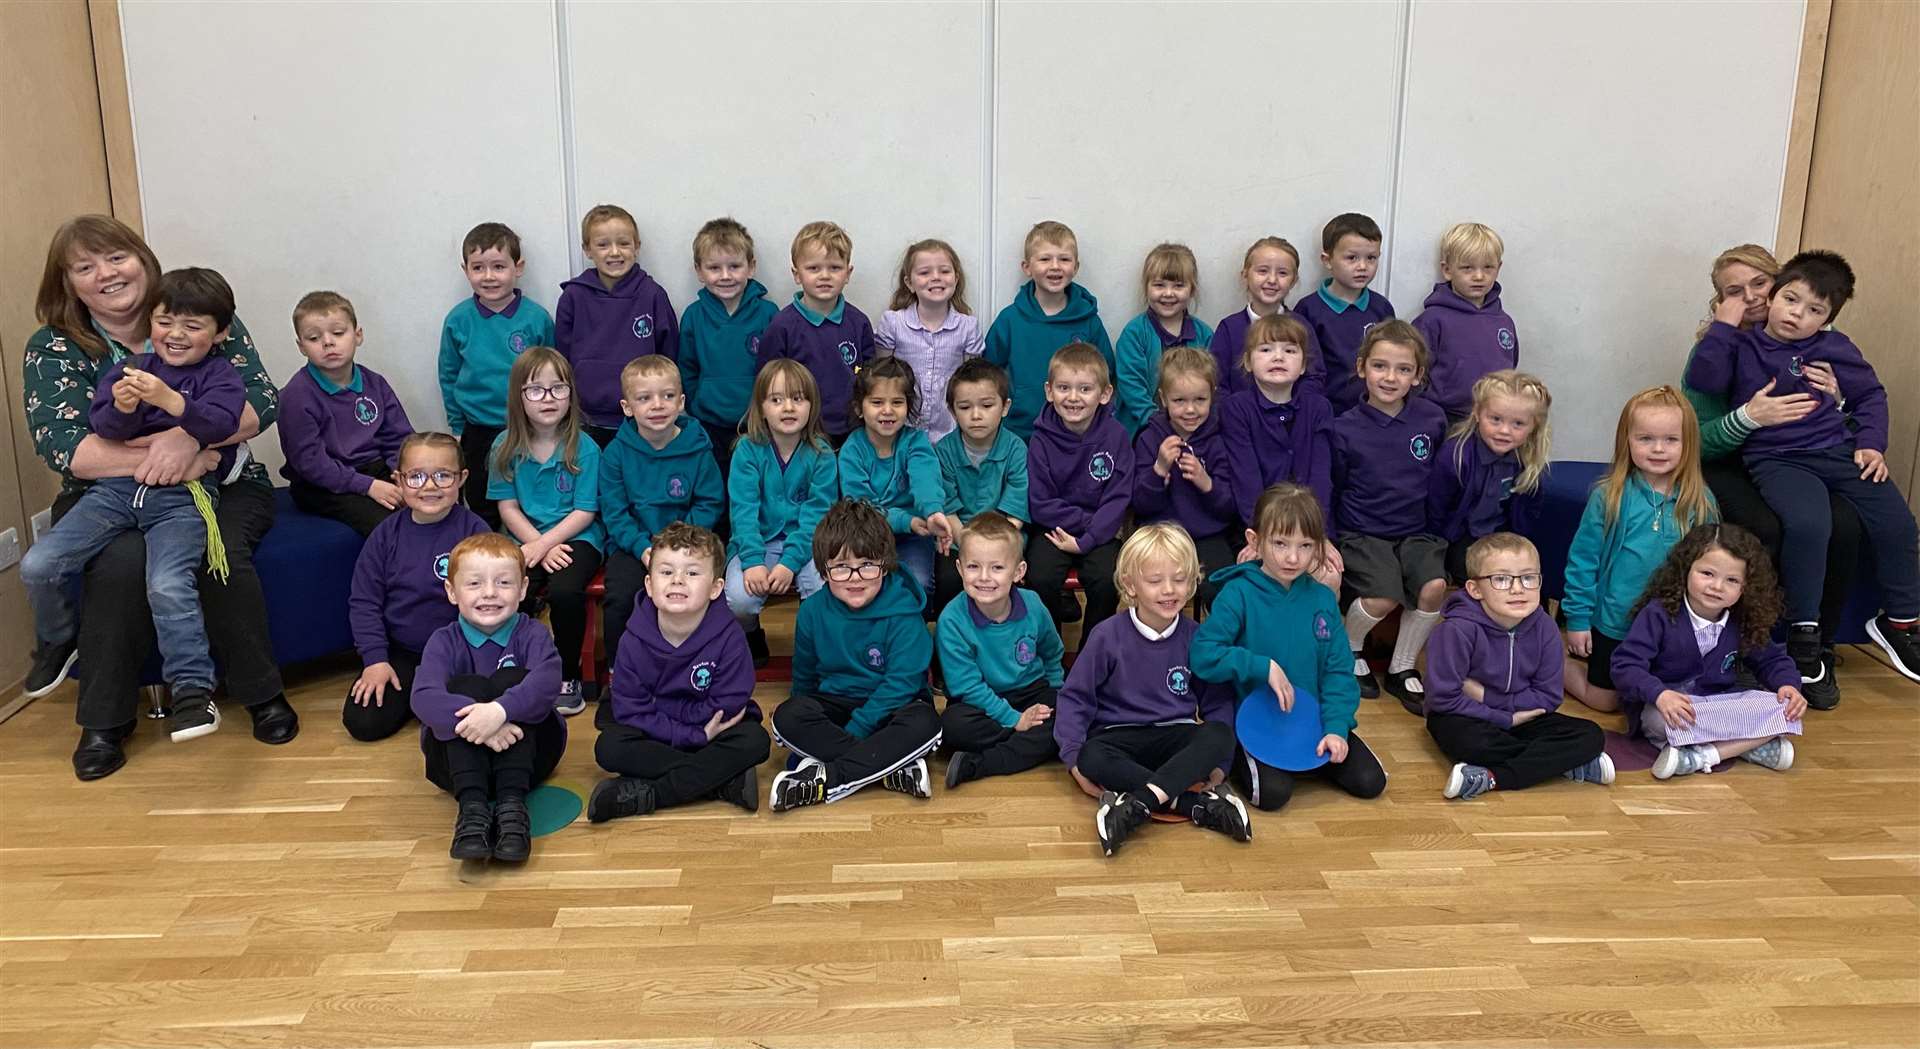 Primary 1 pupils at Newton Park Primary in Wick.